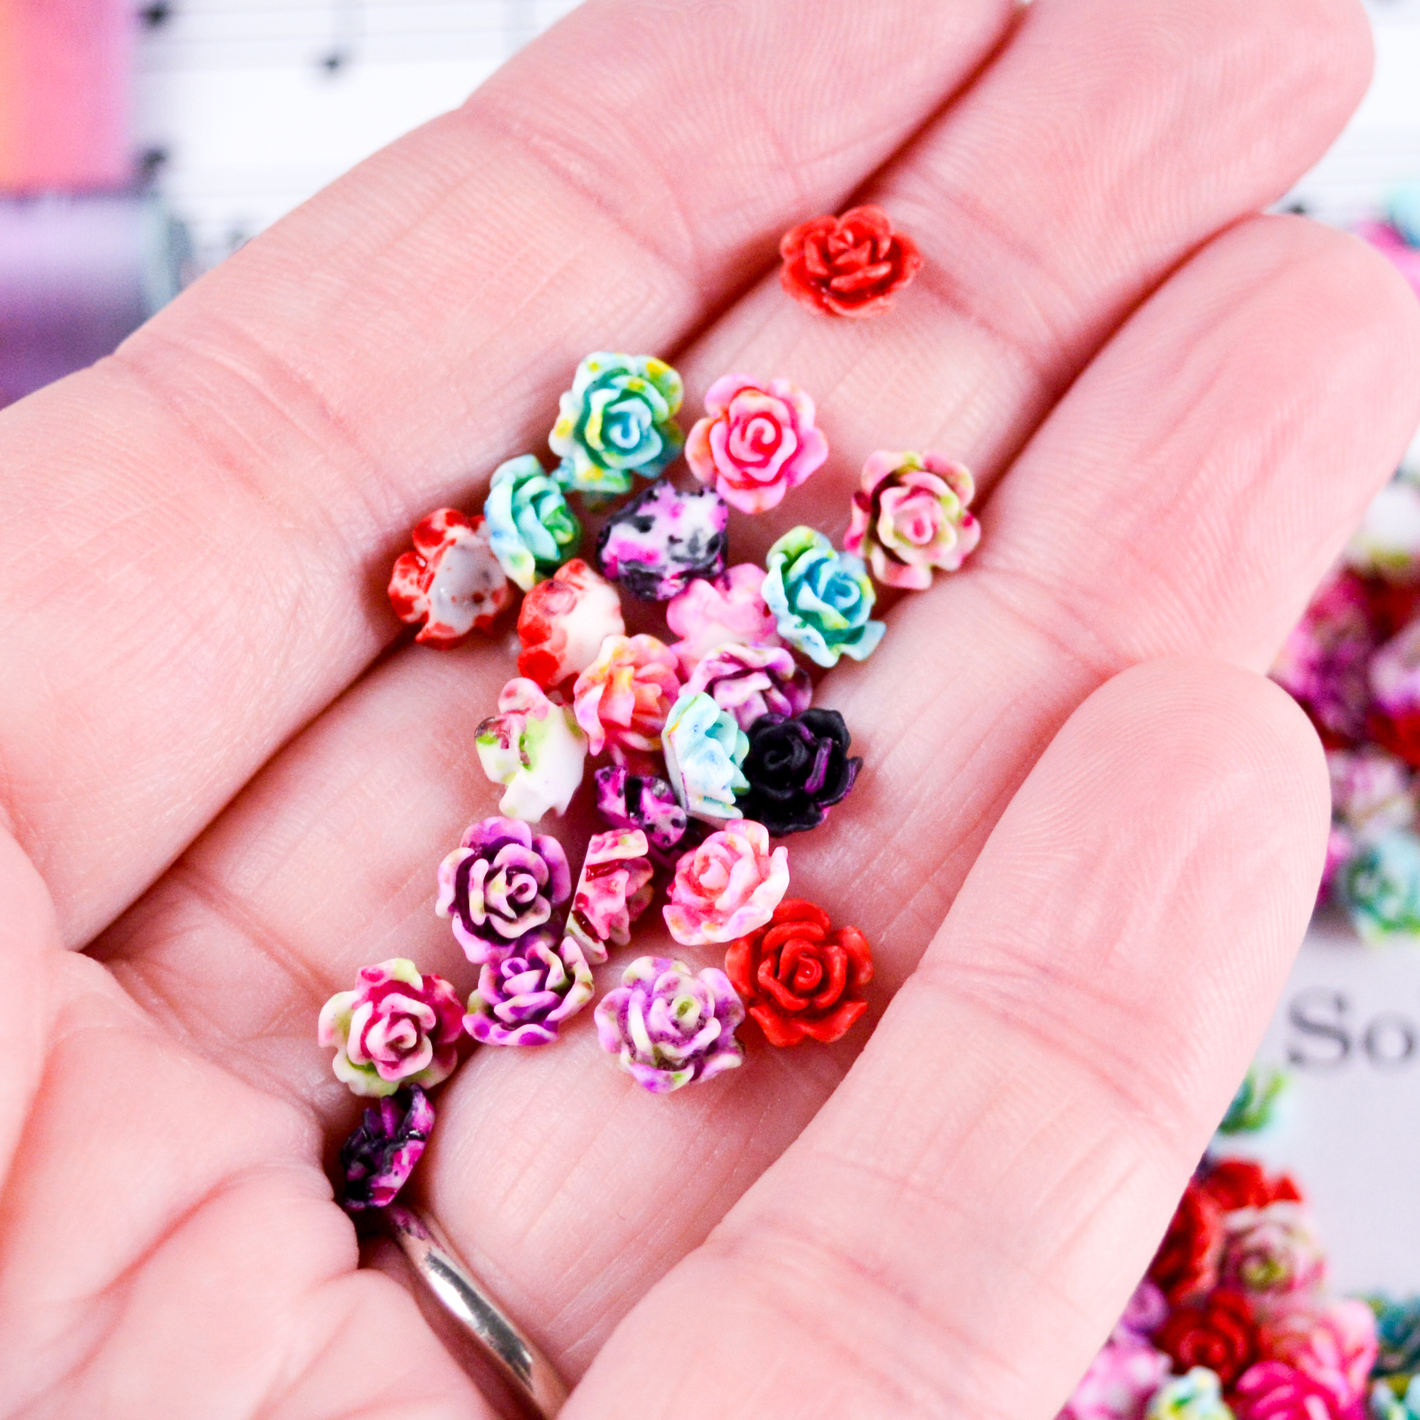 Closeup image of an open hand, holding dozens of tiny 6mm rose cabochons in splatter painted pinks, greens, red, black and purples.